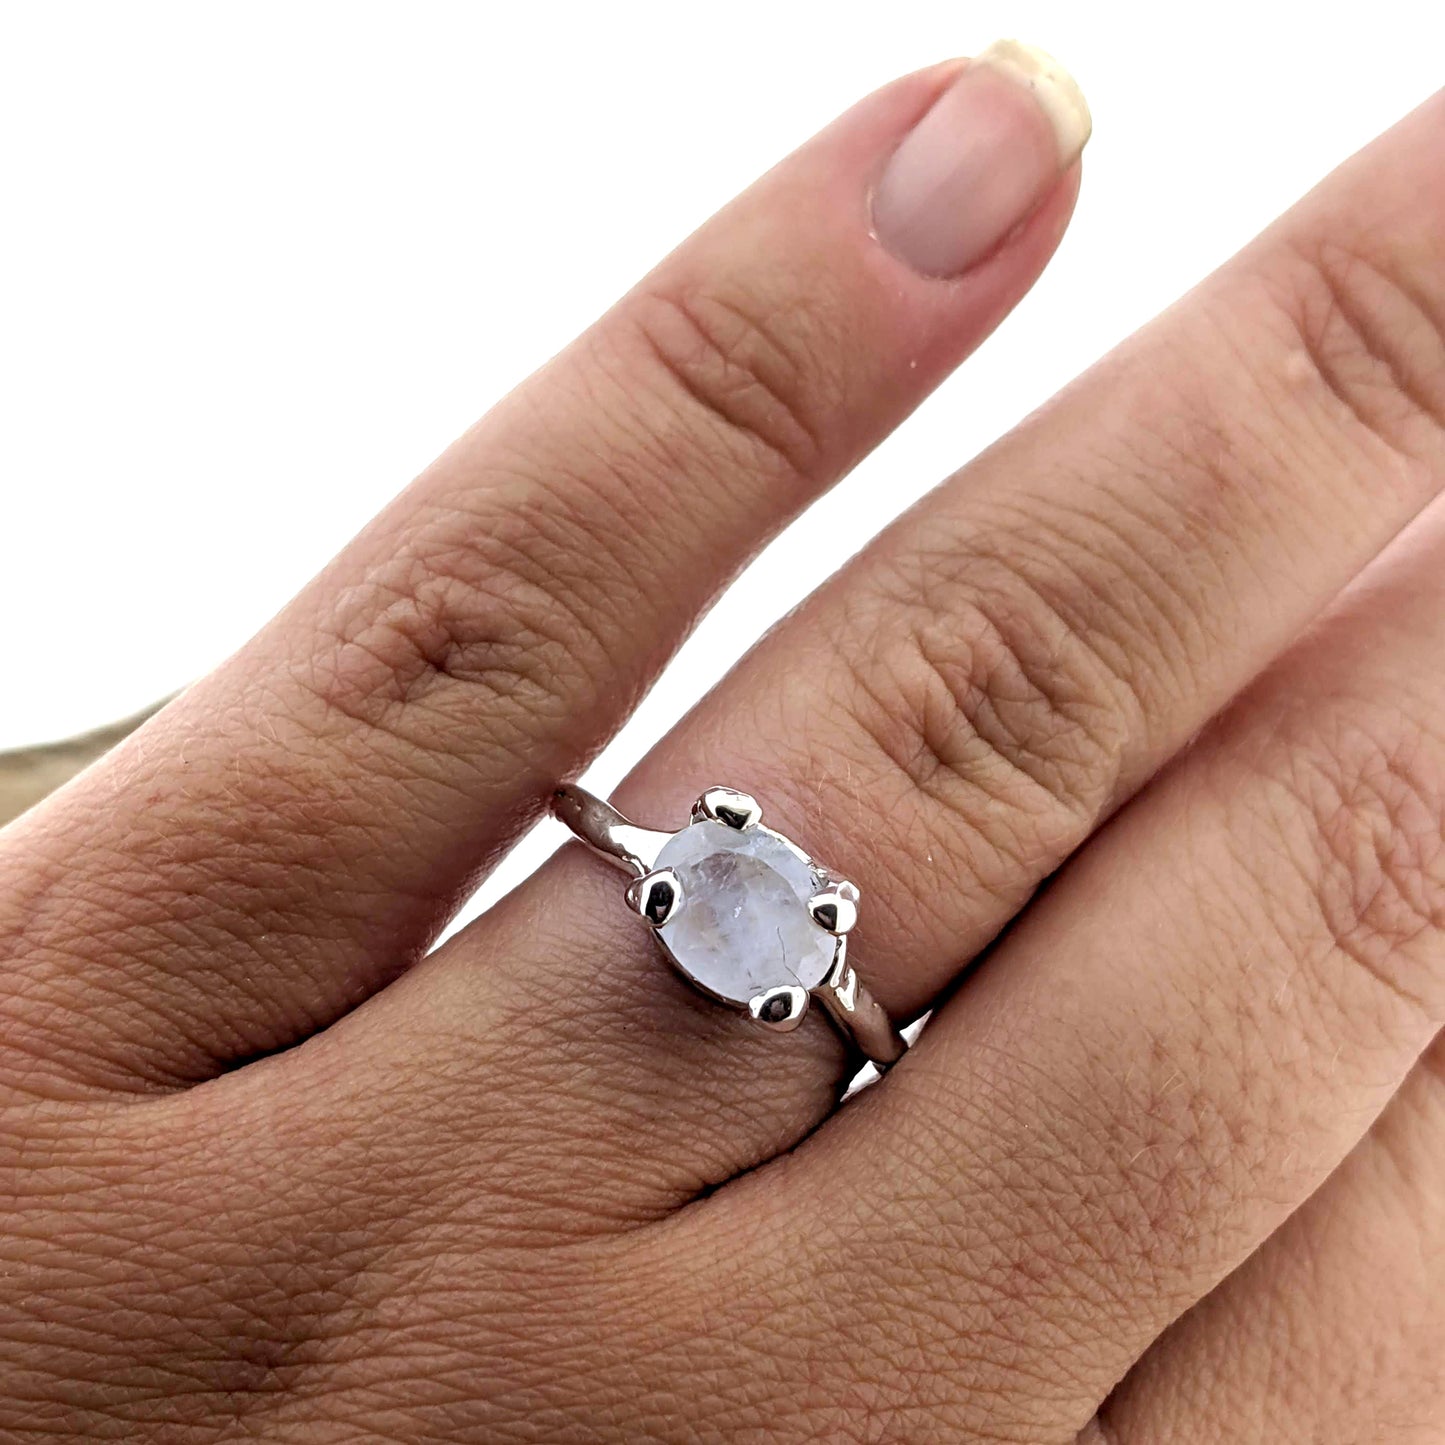 organic design rainbow moonstone and sterling silver solitaire ring, shown displayed on hand.